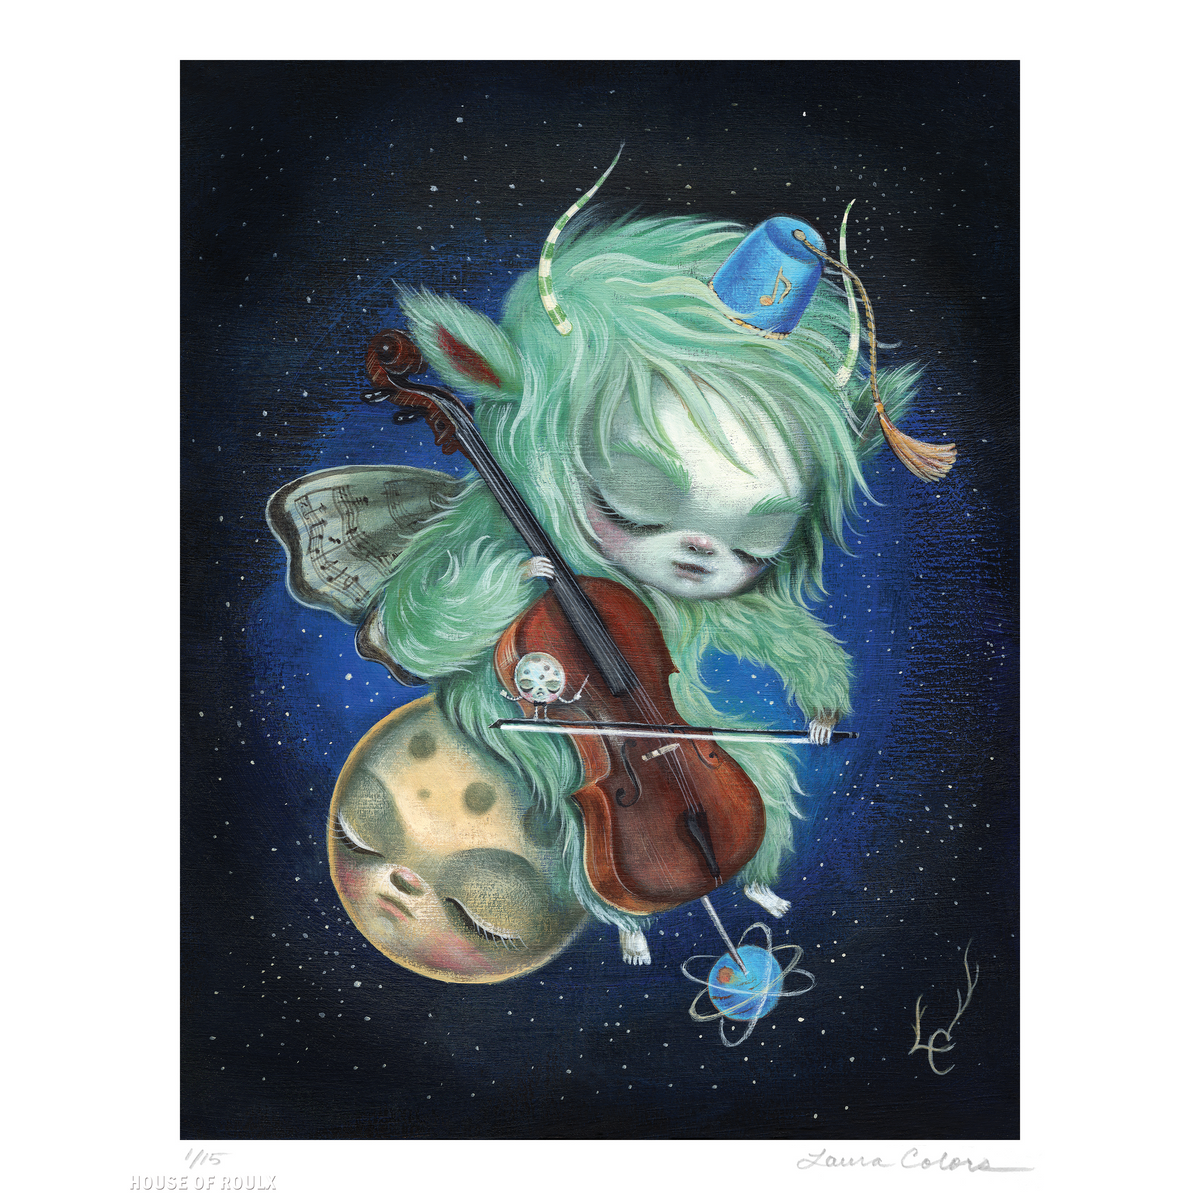 Laura Colors &quot;Yeti Symphonic in Cello&quot; - Archival Print, Limited Edition of 15 - 8 x 10&quot;